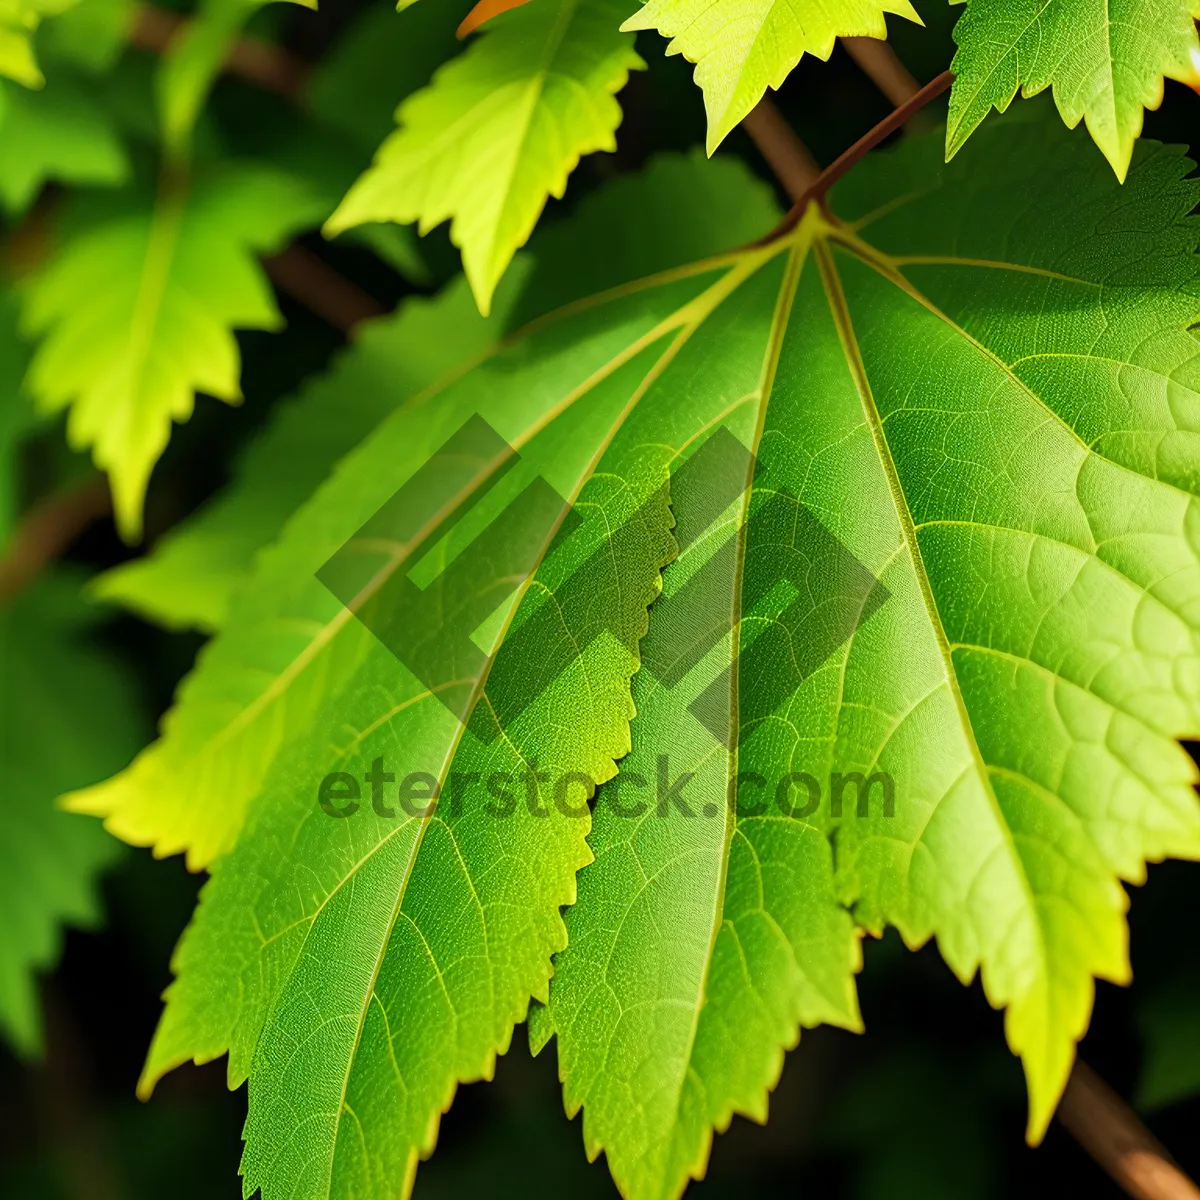 Picture of Vibrant Maple Leaves in Sunlit Forest